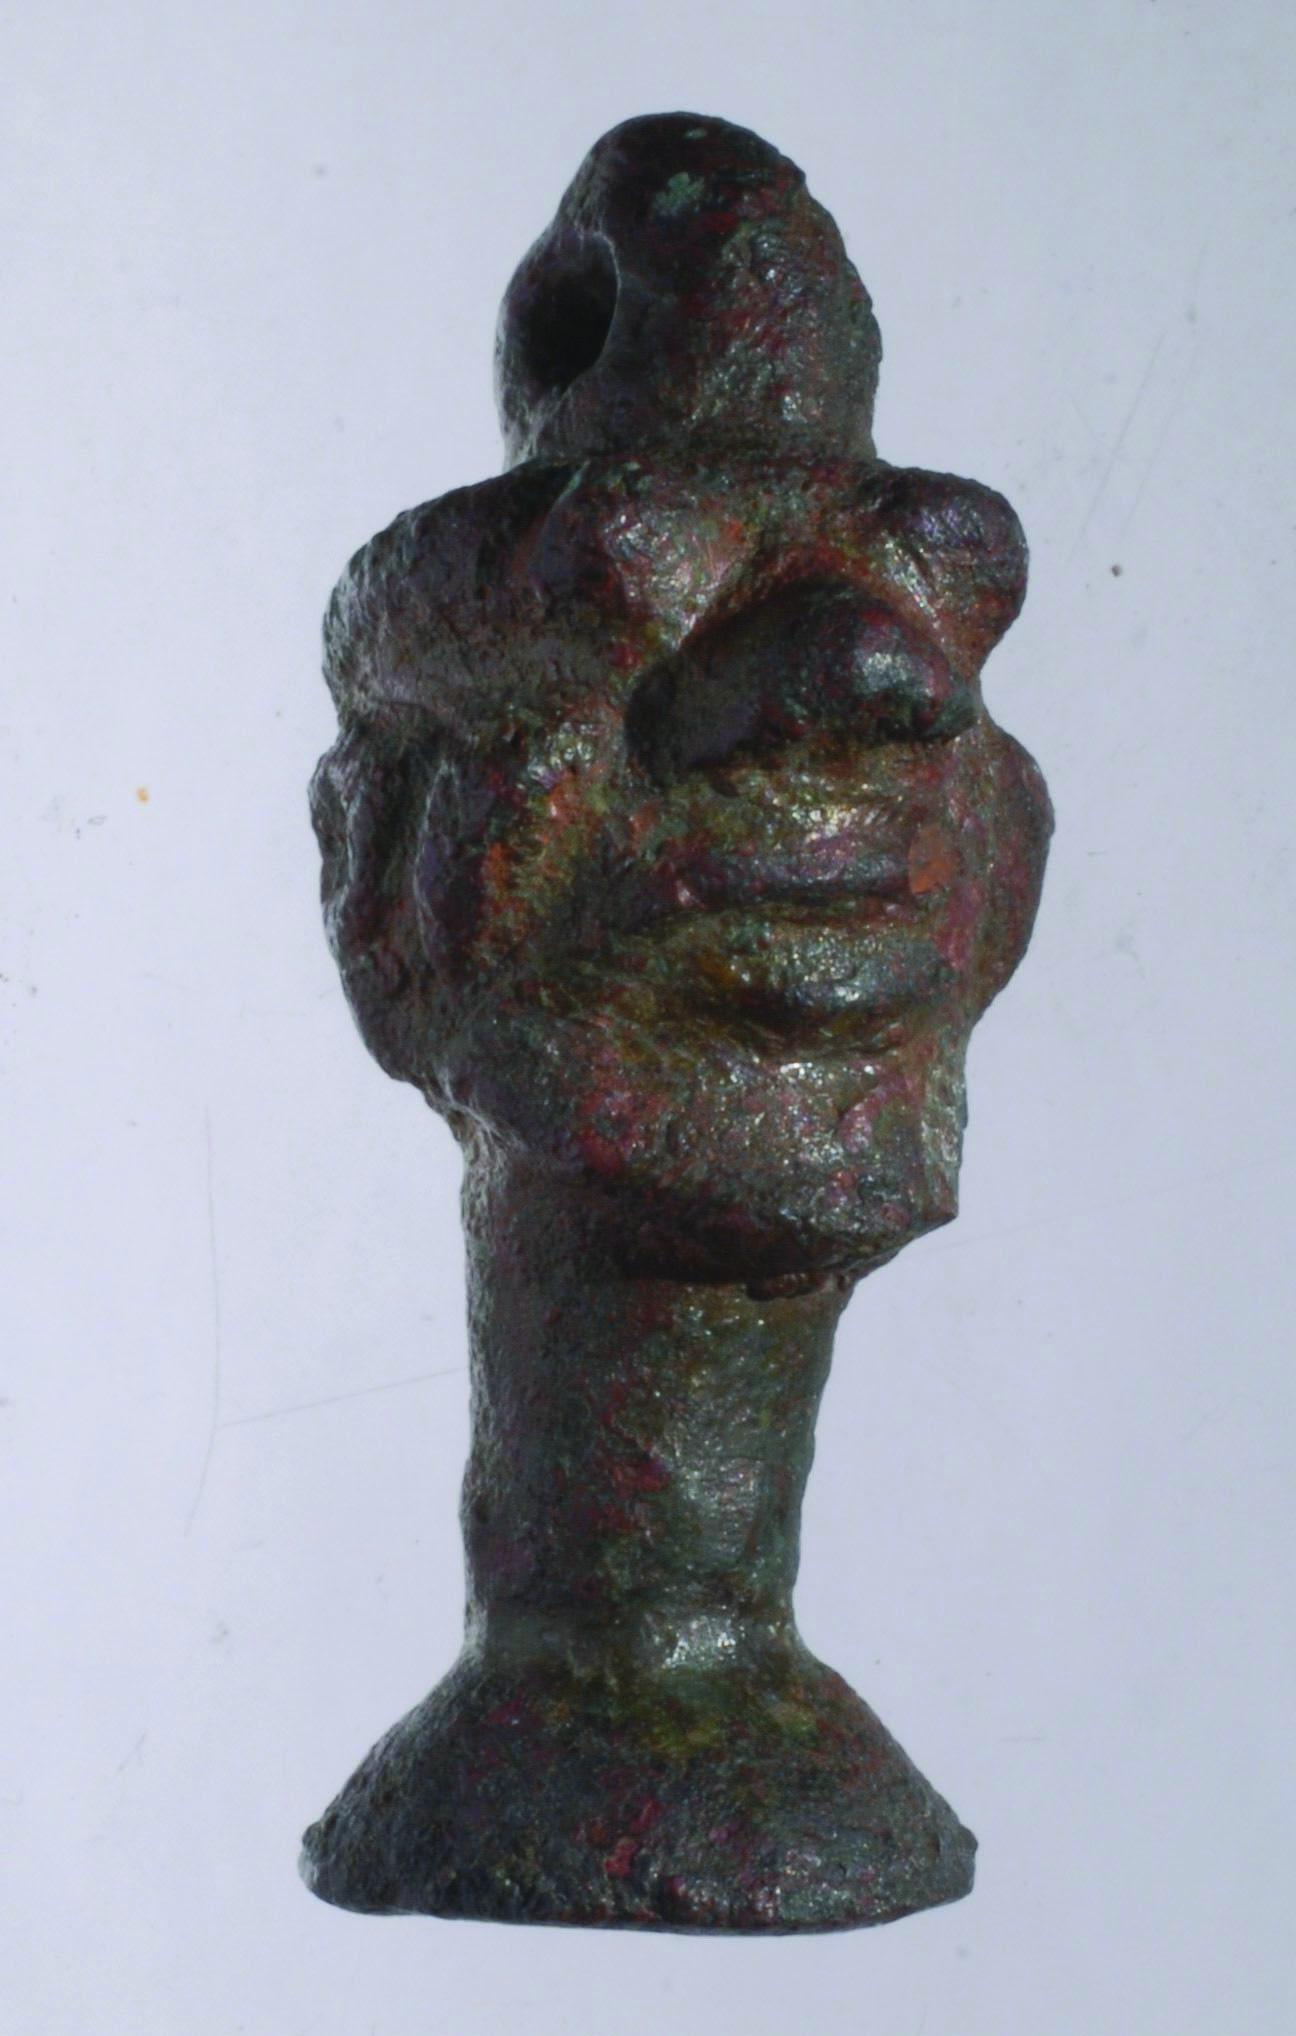 Bronze amulet of head with human and animal features and loop on top.